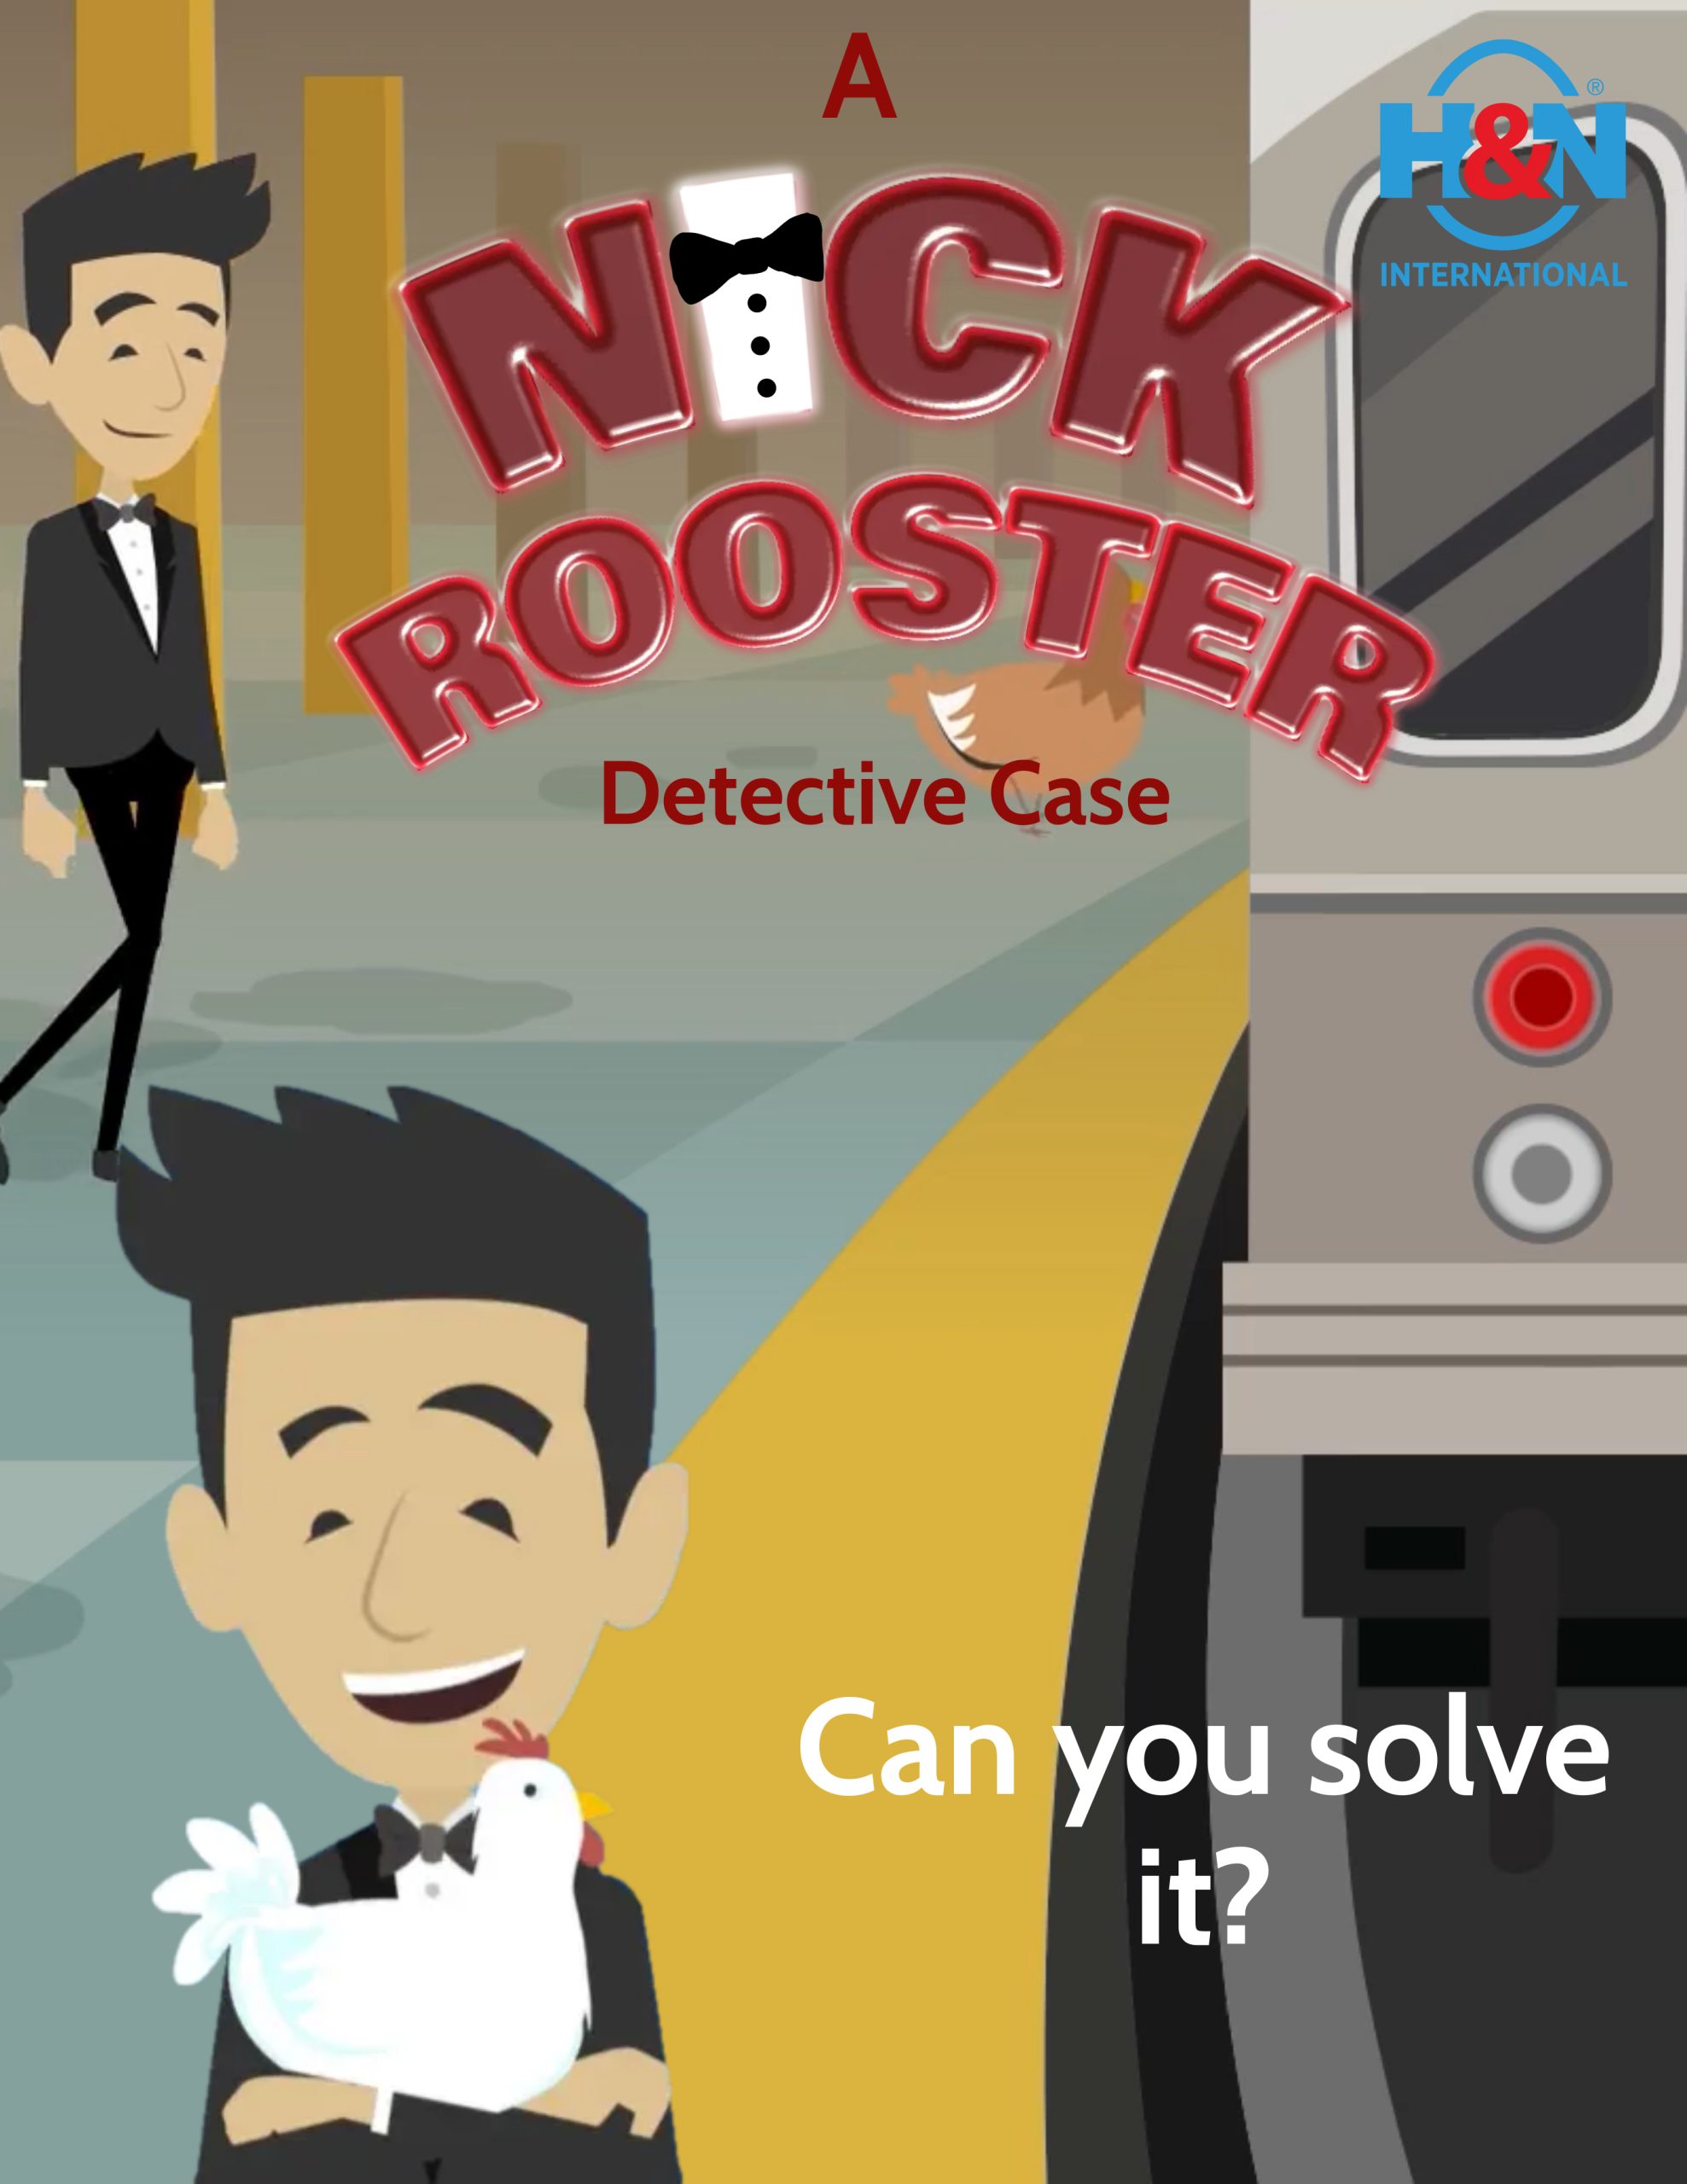 Nick Rooster case no. 16